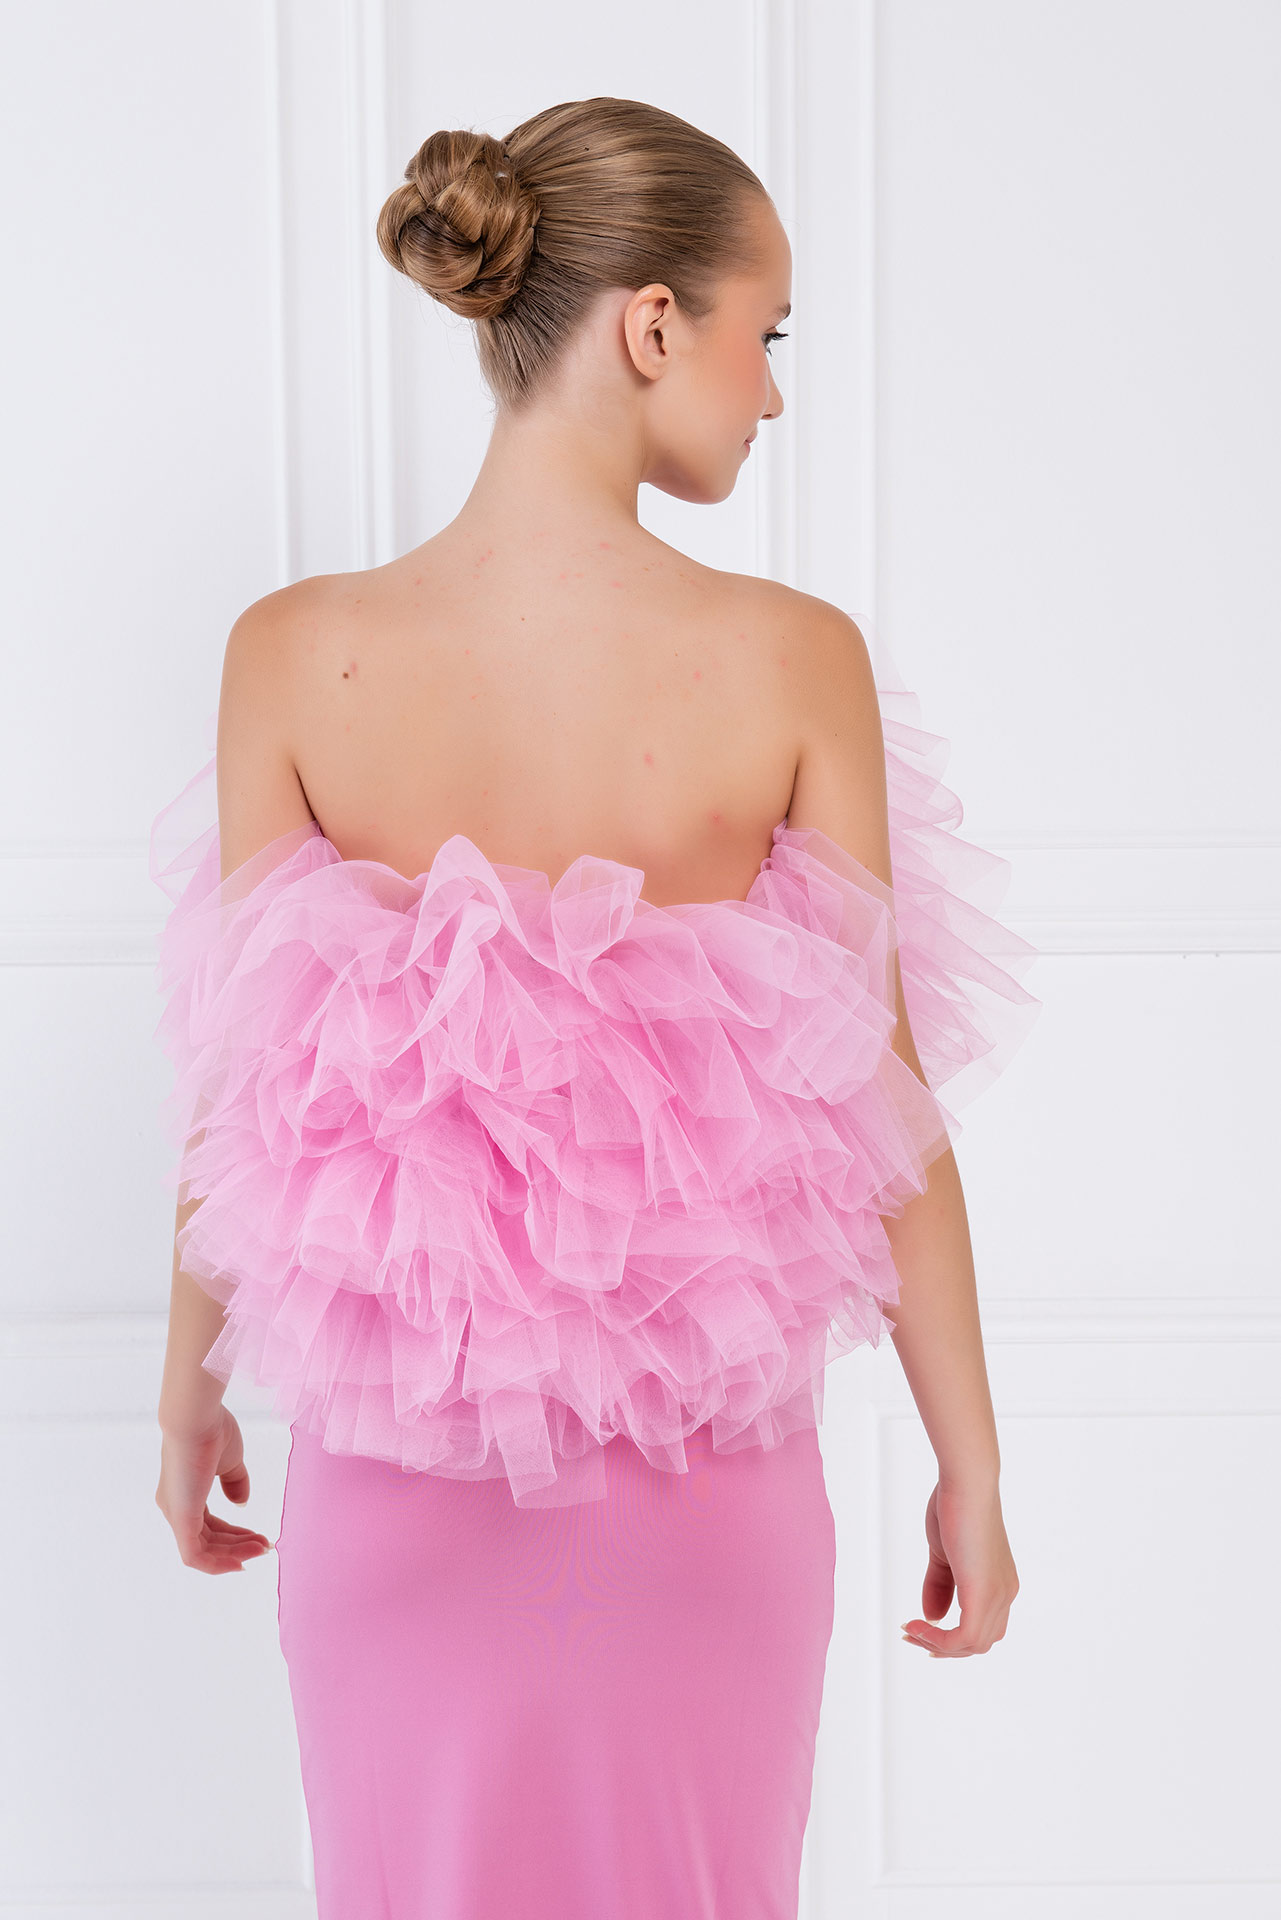 Wholesale Tulle New Pink Bustier